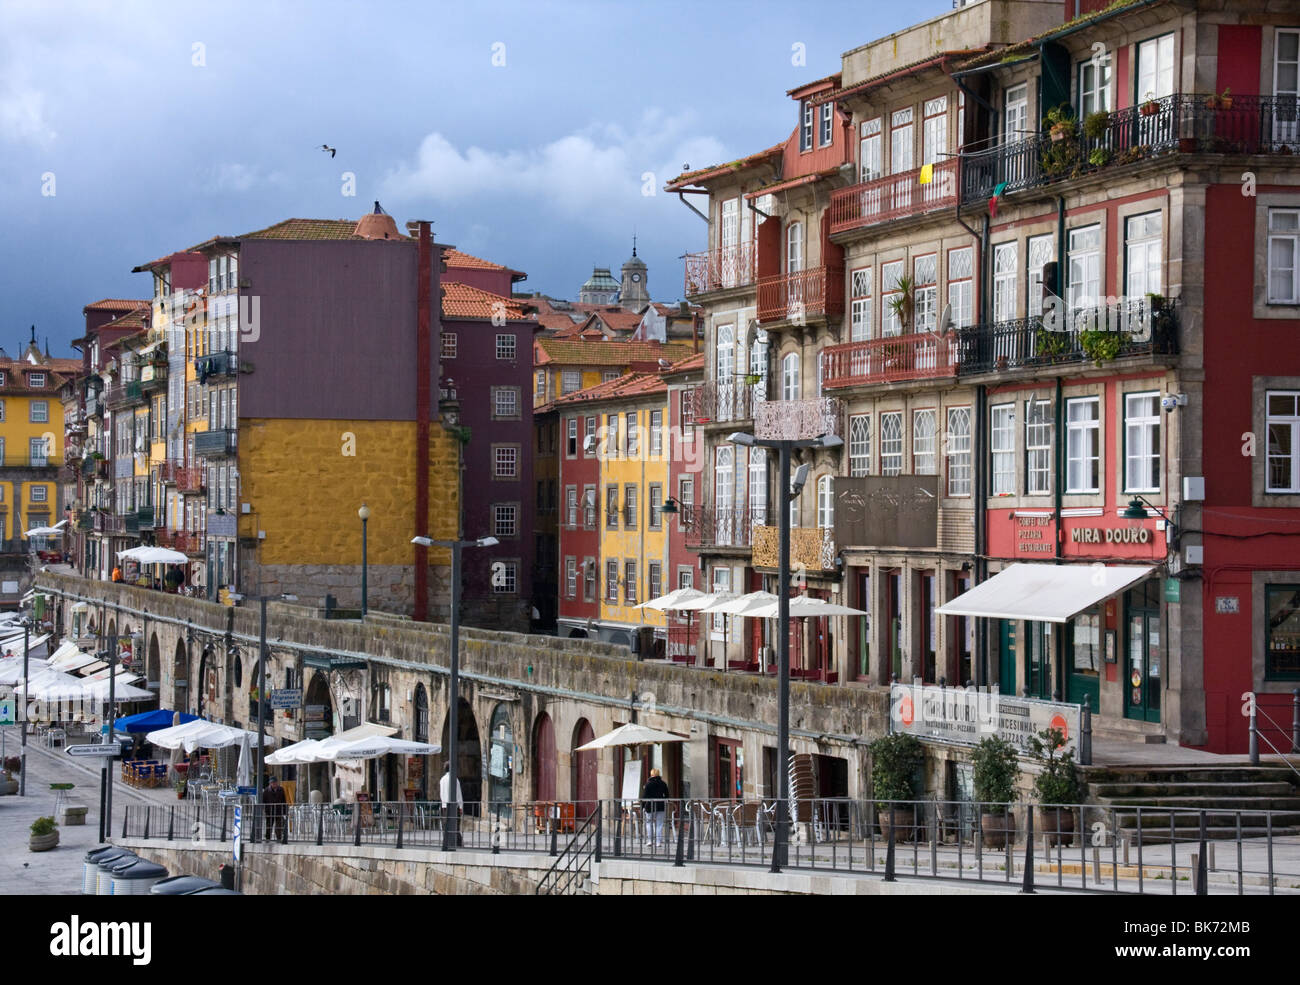 Sidewalk cafes on Ribeira Riverfront, city of Porto (also known as Oporto) a UNESCO World Heritage Site, north Portugal Stock Photo